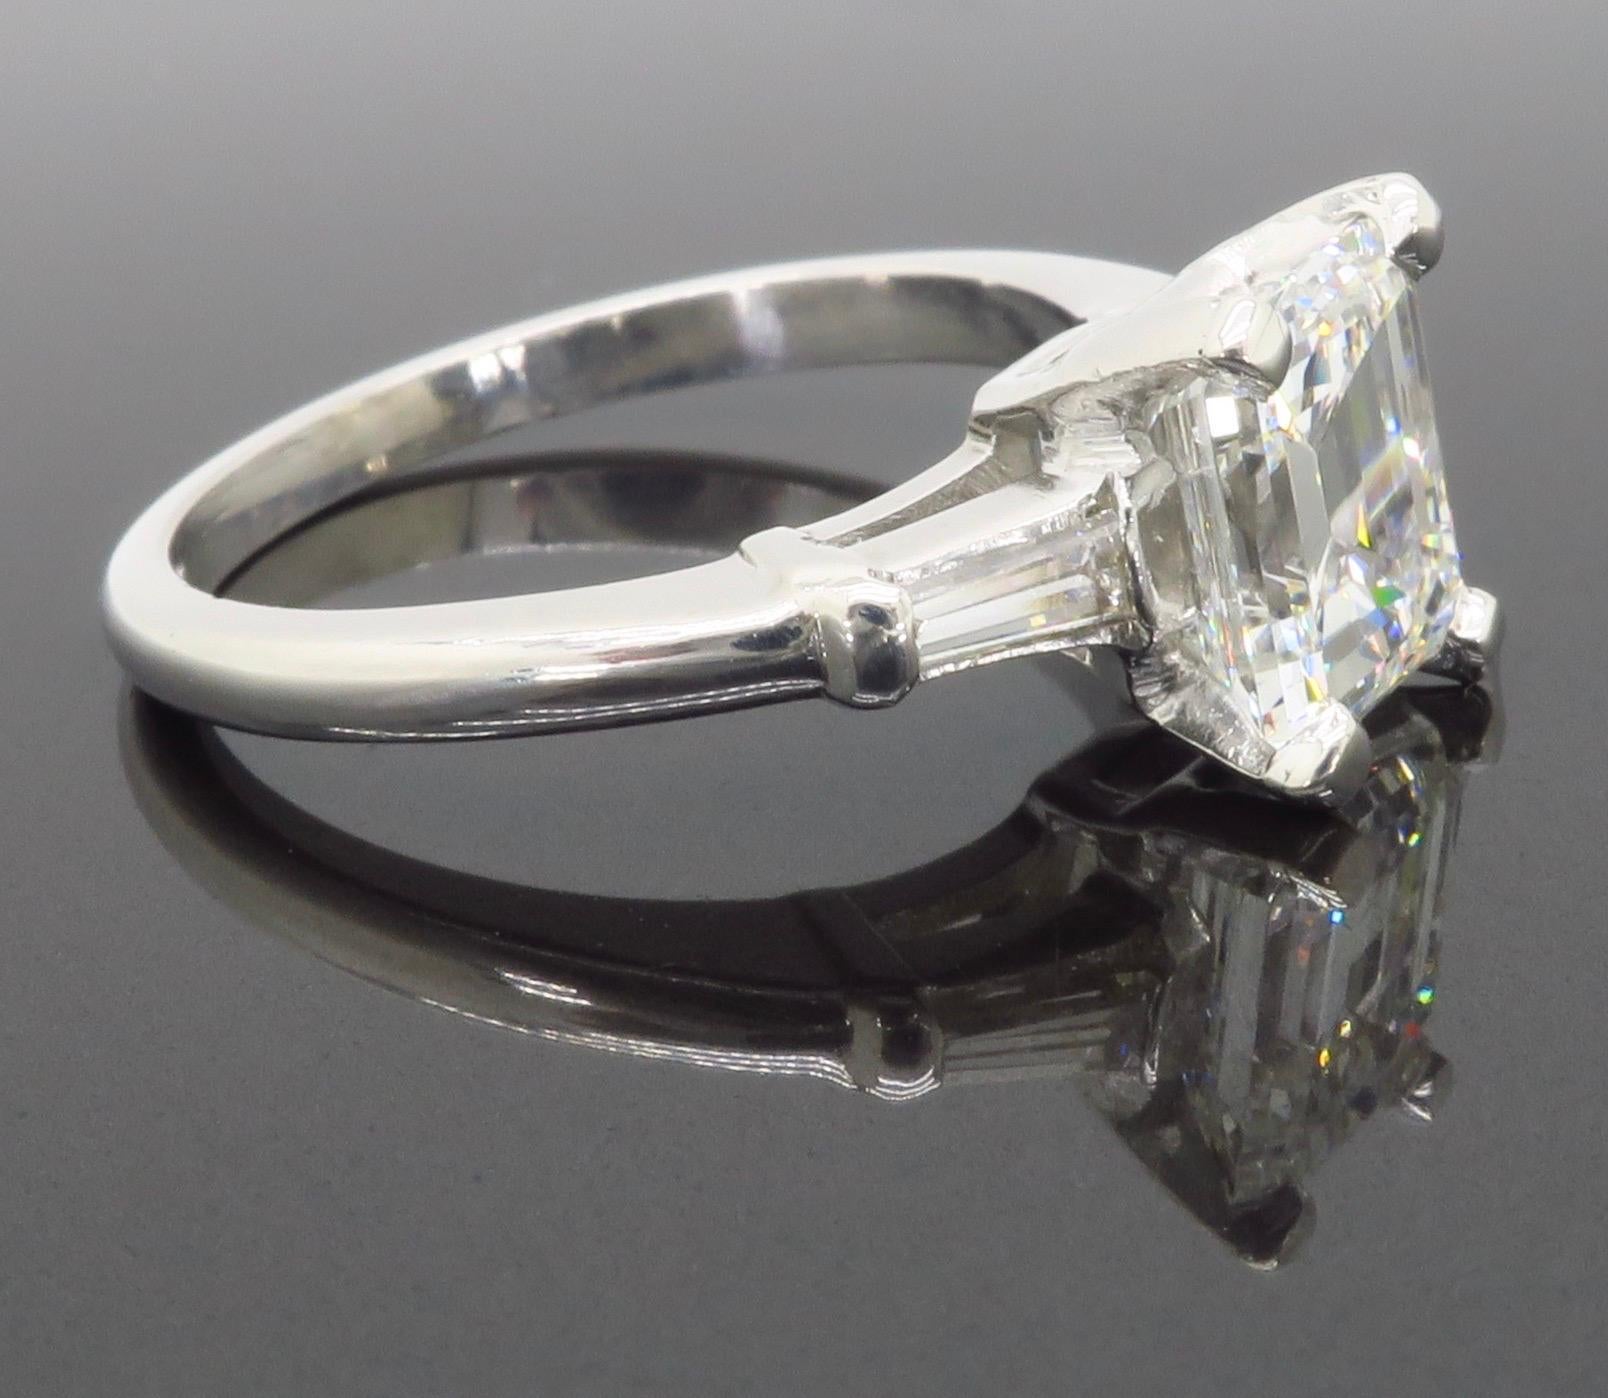 Elegant GIA Certified Emerald Cut Diamond Engagement Ring with Tapered Baguettes 8